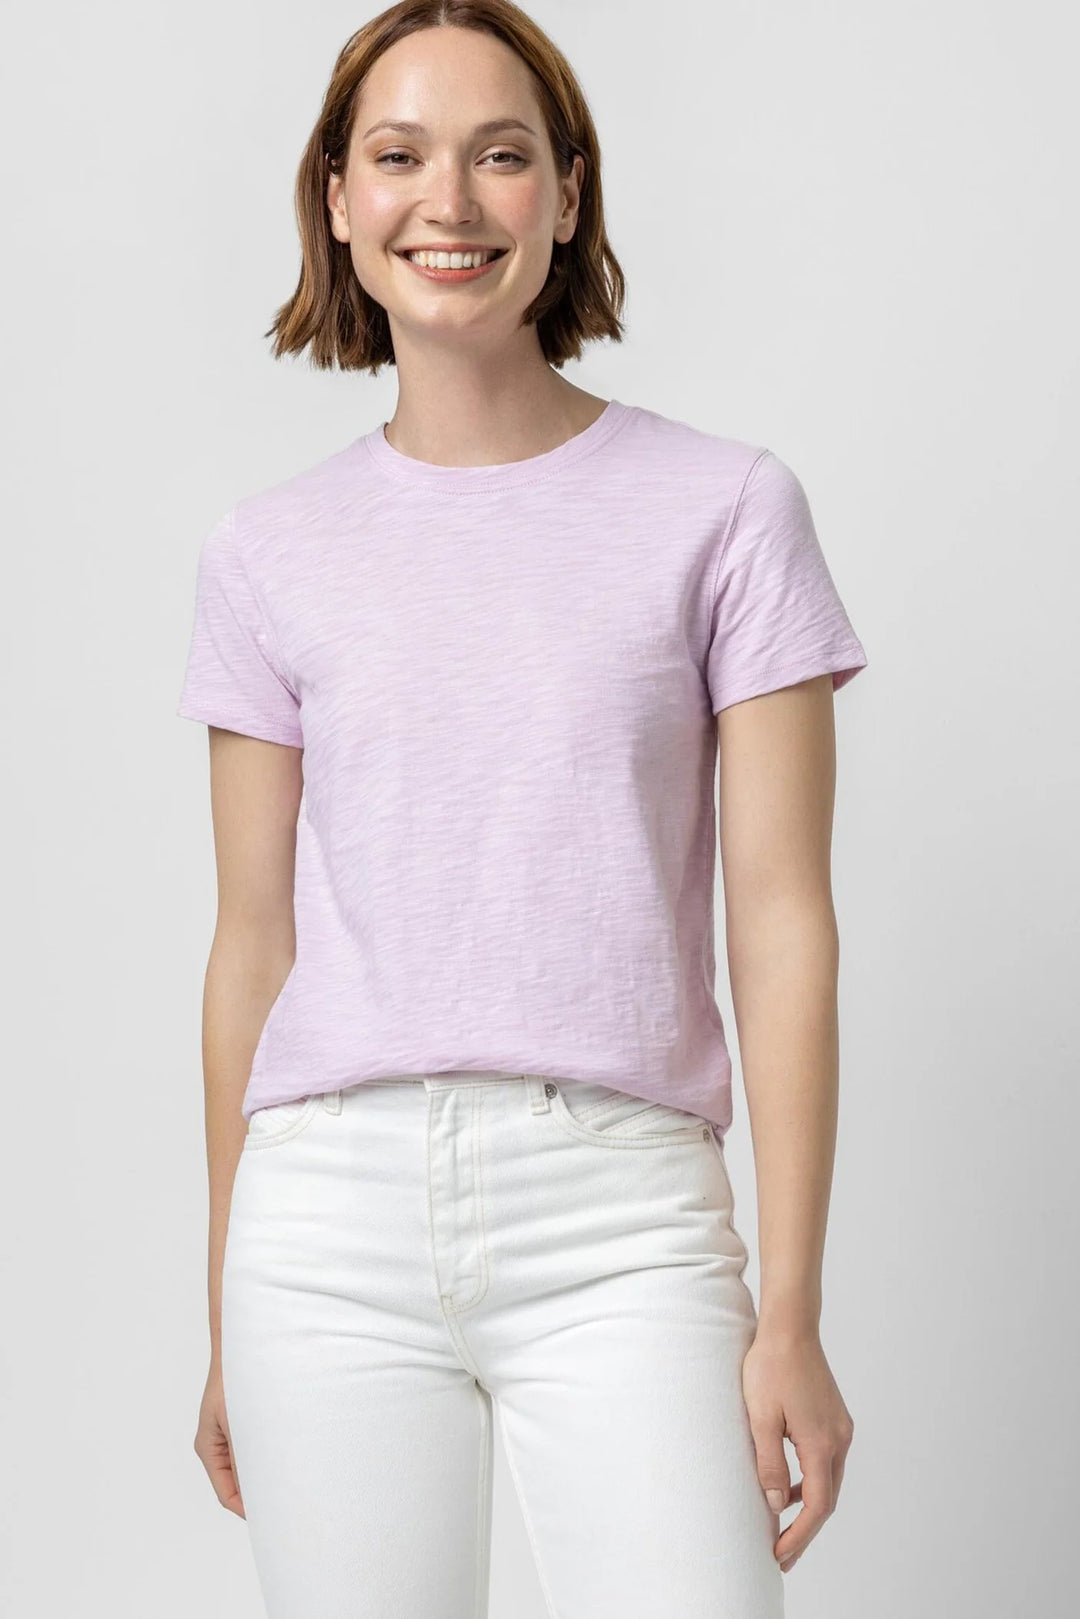 Short Sleeve Crewneck in Orchid - Madison's Niche 